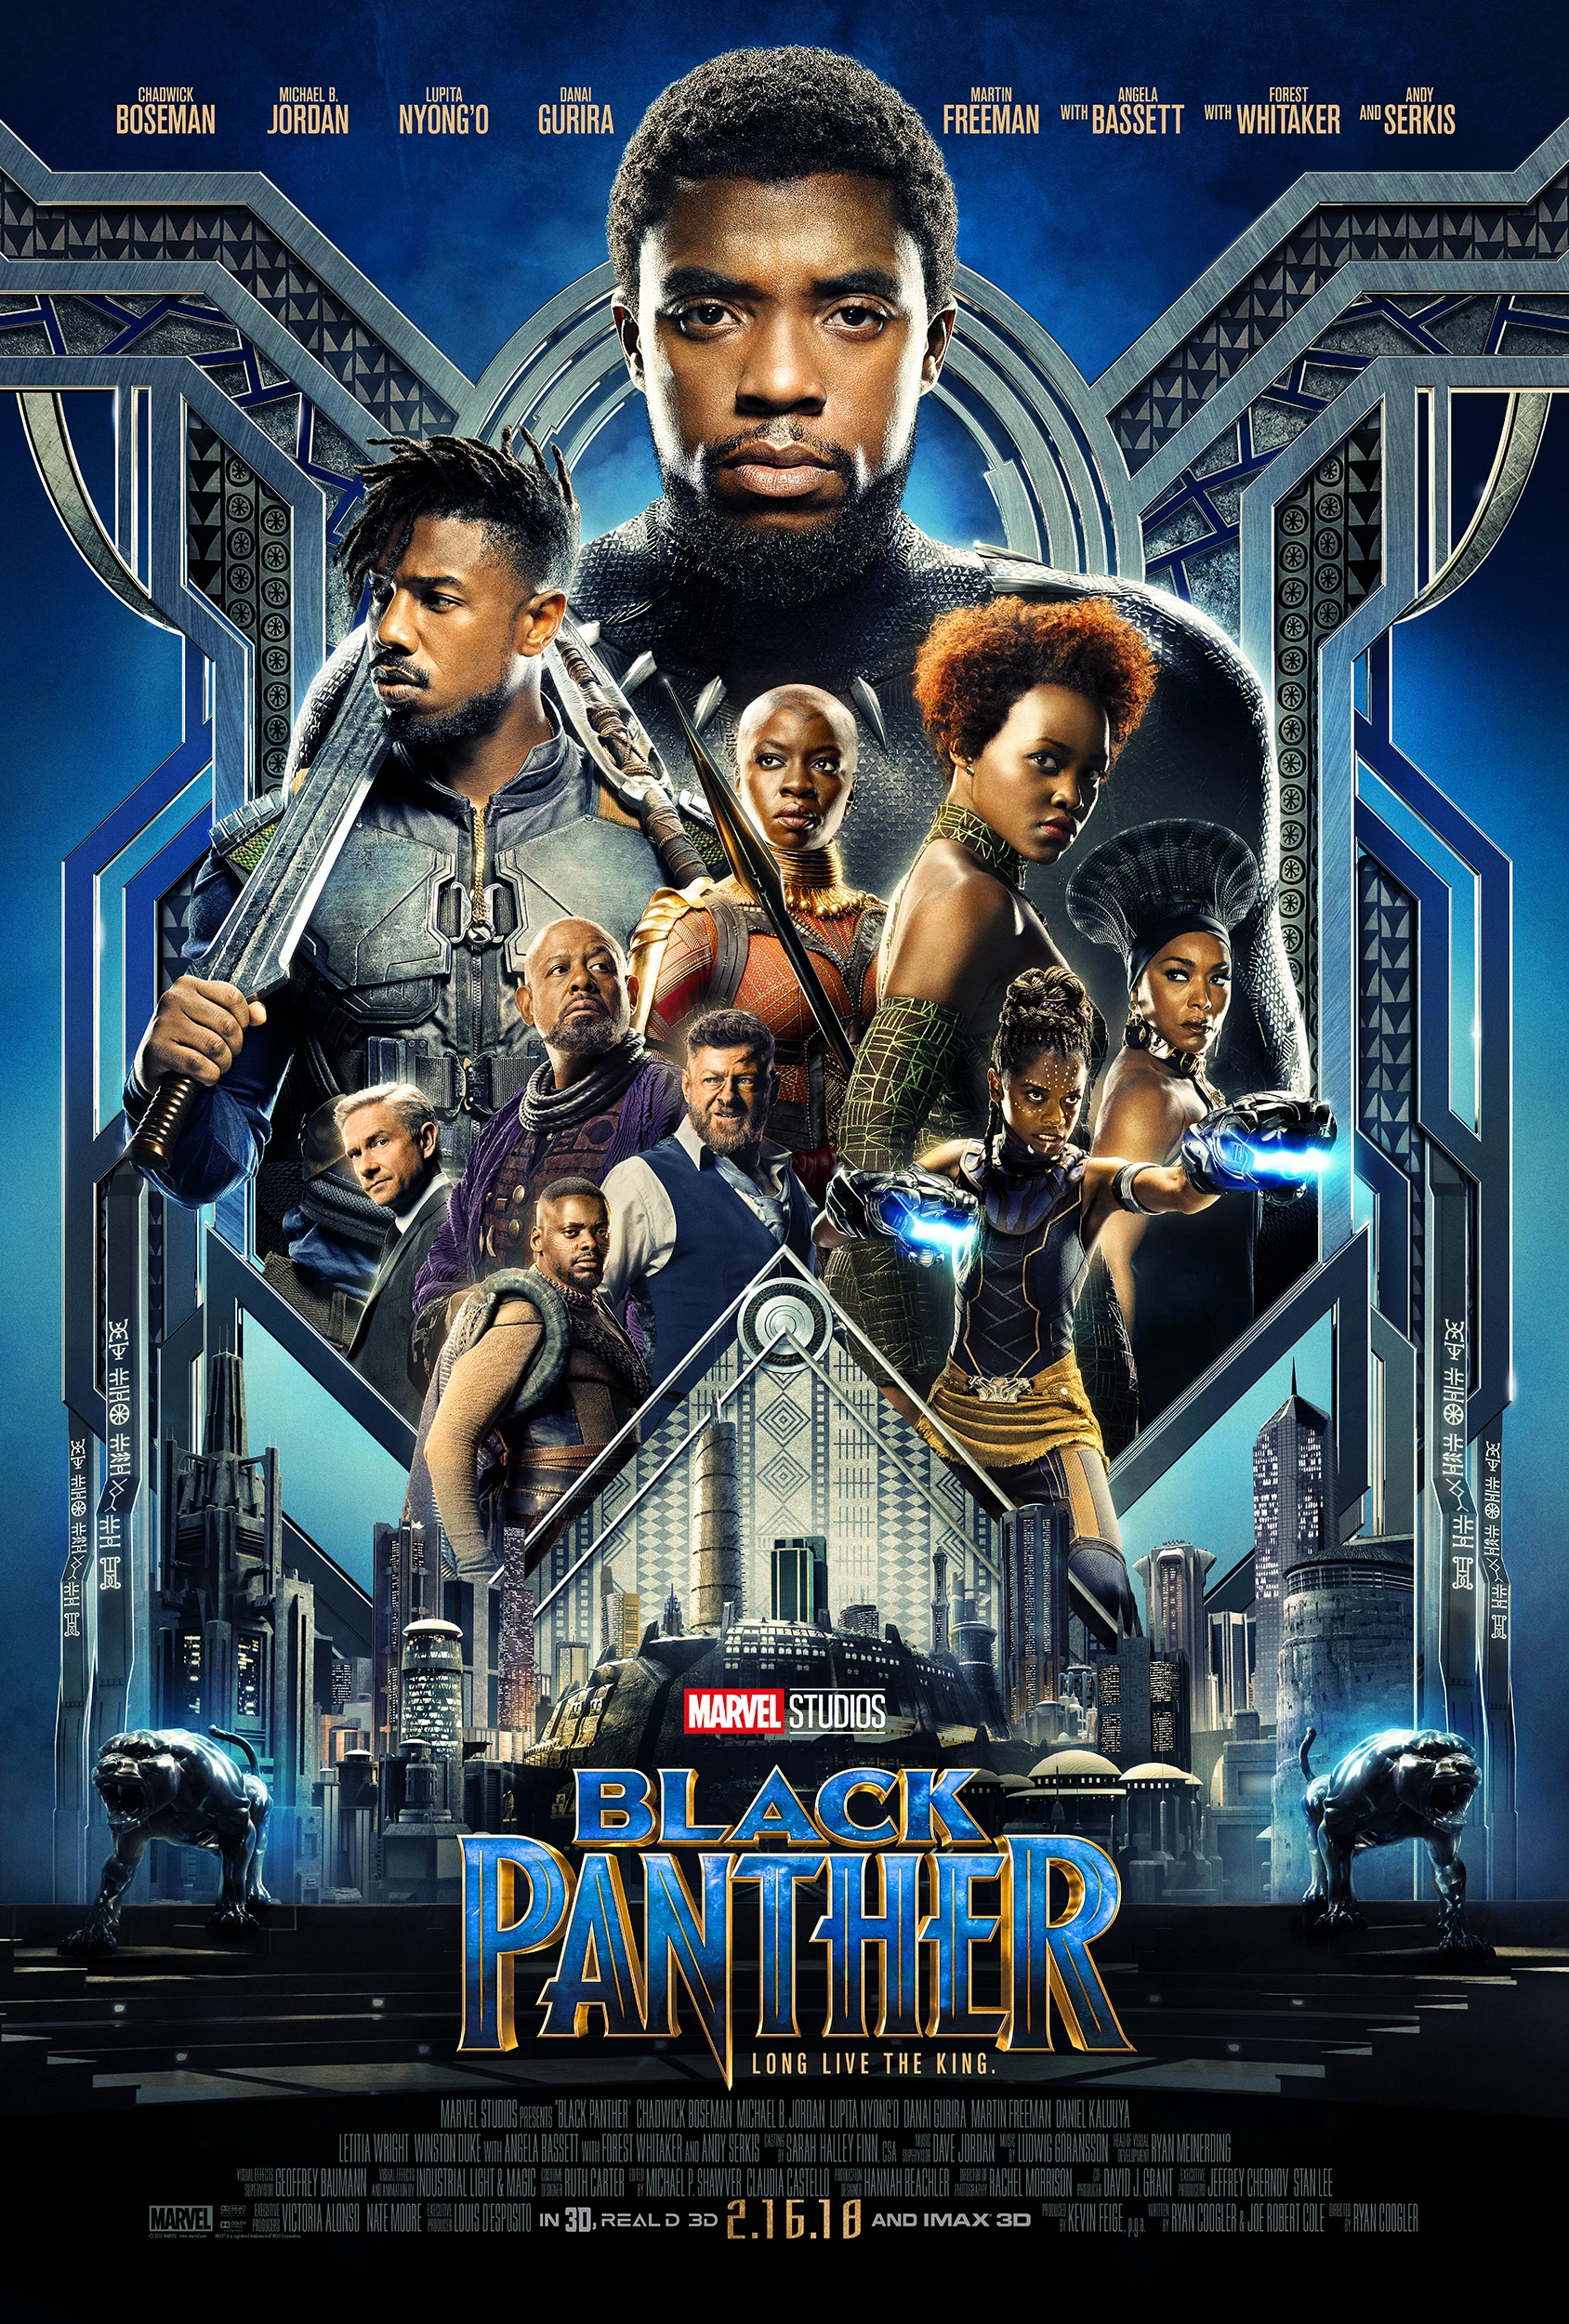 Black Panther Trailer and Poster released October 2017! New Marvel coming to the screen in February 2018